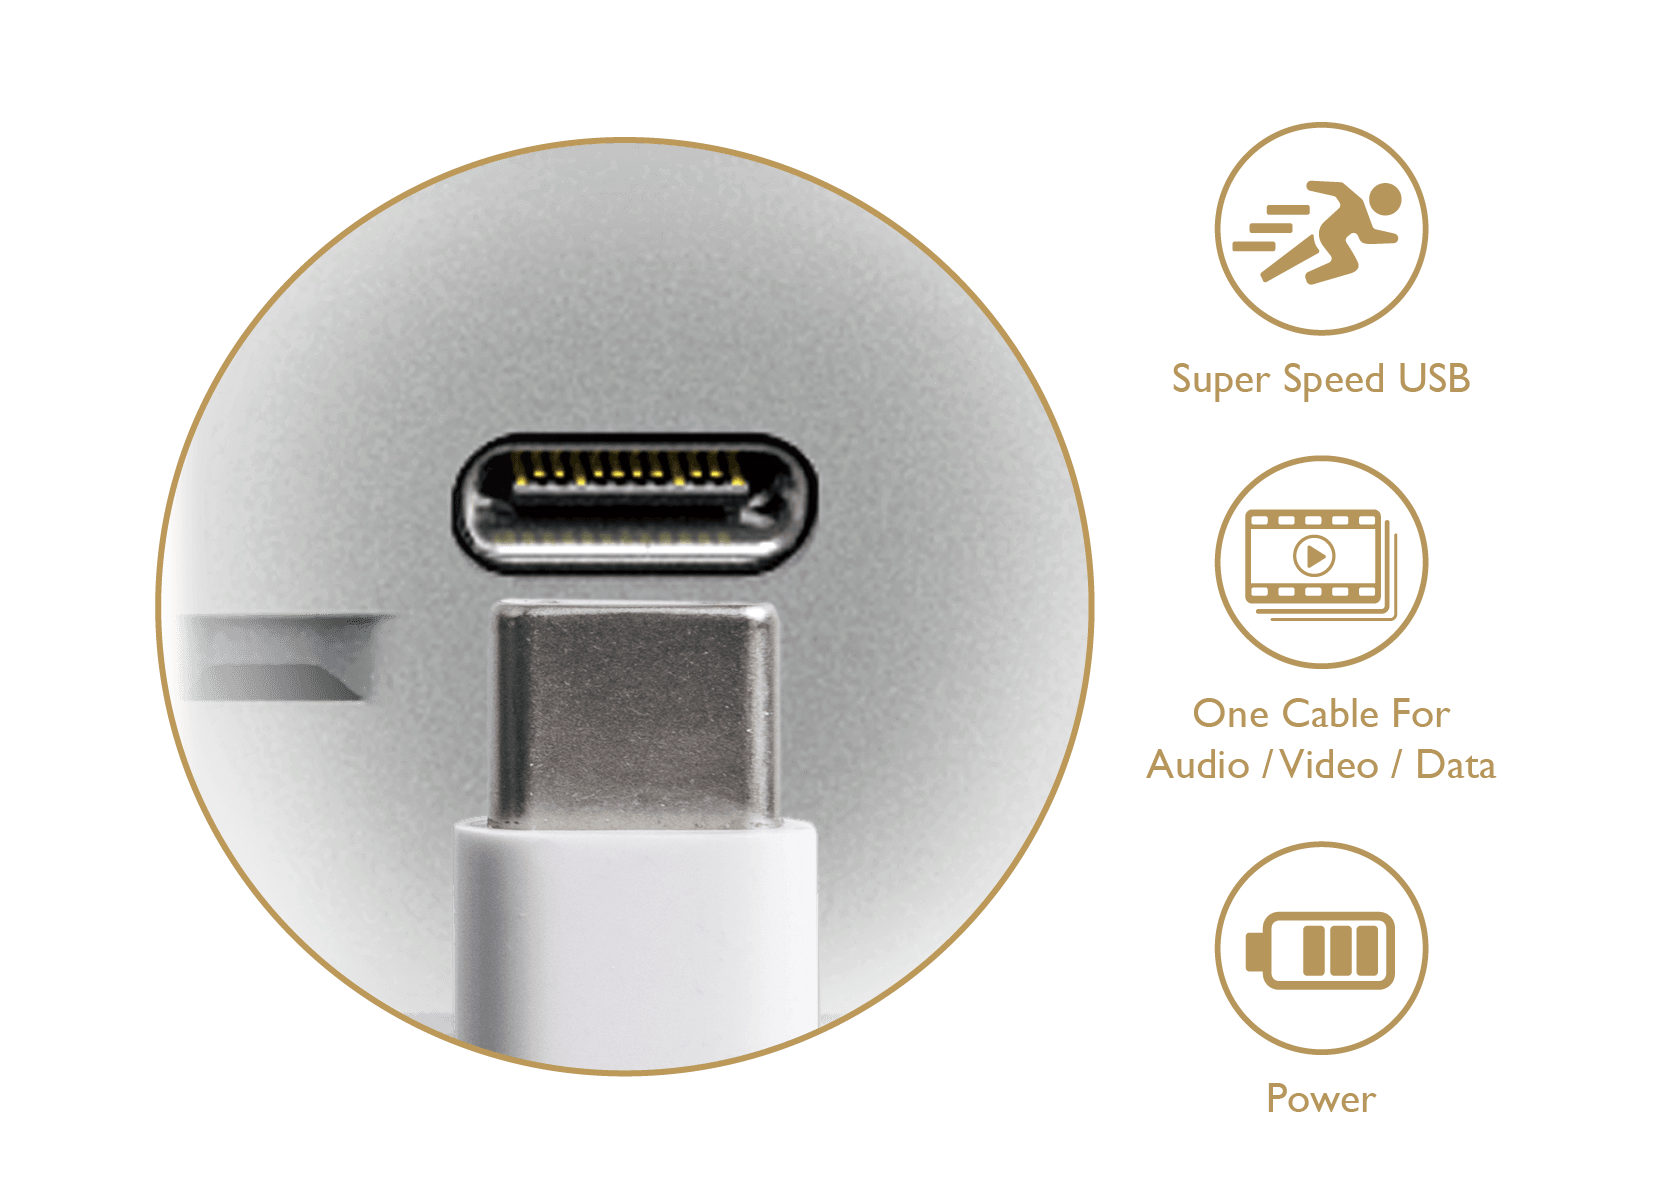 benq sw271c provides high-speed video audio and data transmission and 60w power delivery with a single cable through the usb-c port 